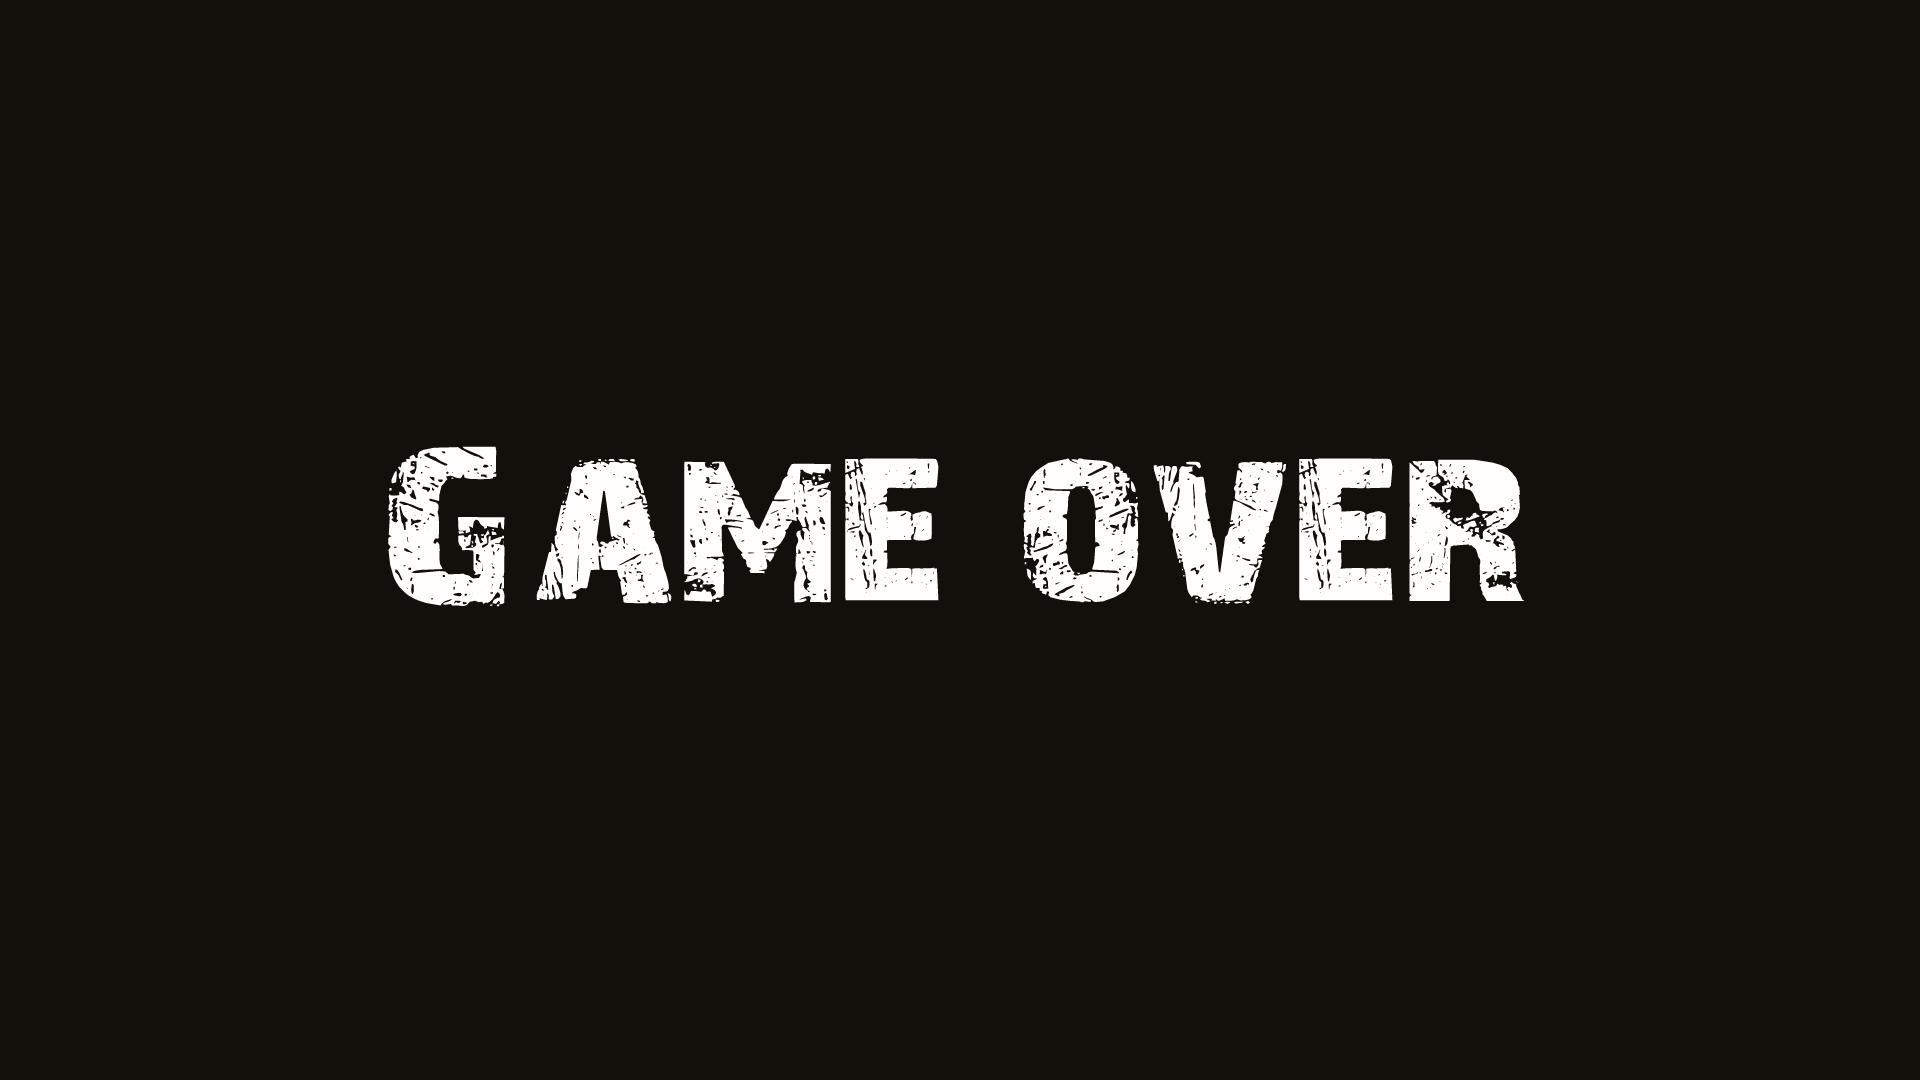 General 1920x1080 typo minimalism GAME OVER video games monochrome typography video game art simple background black background